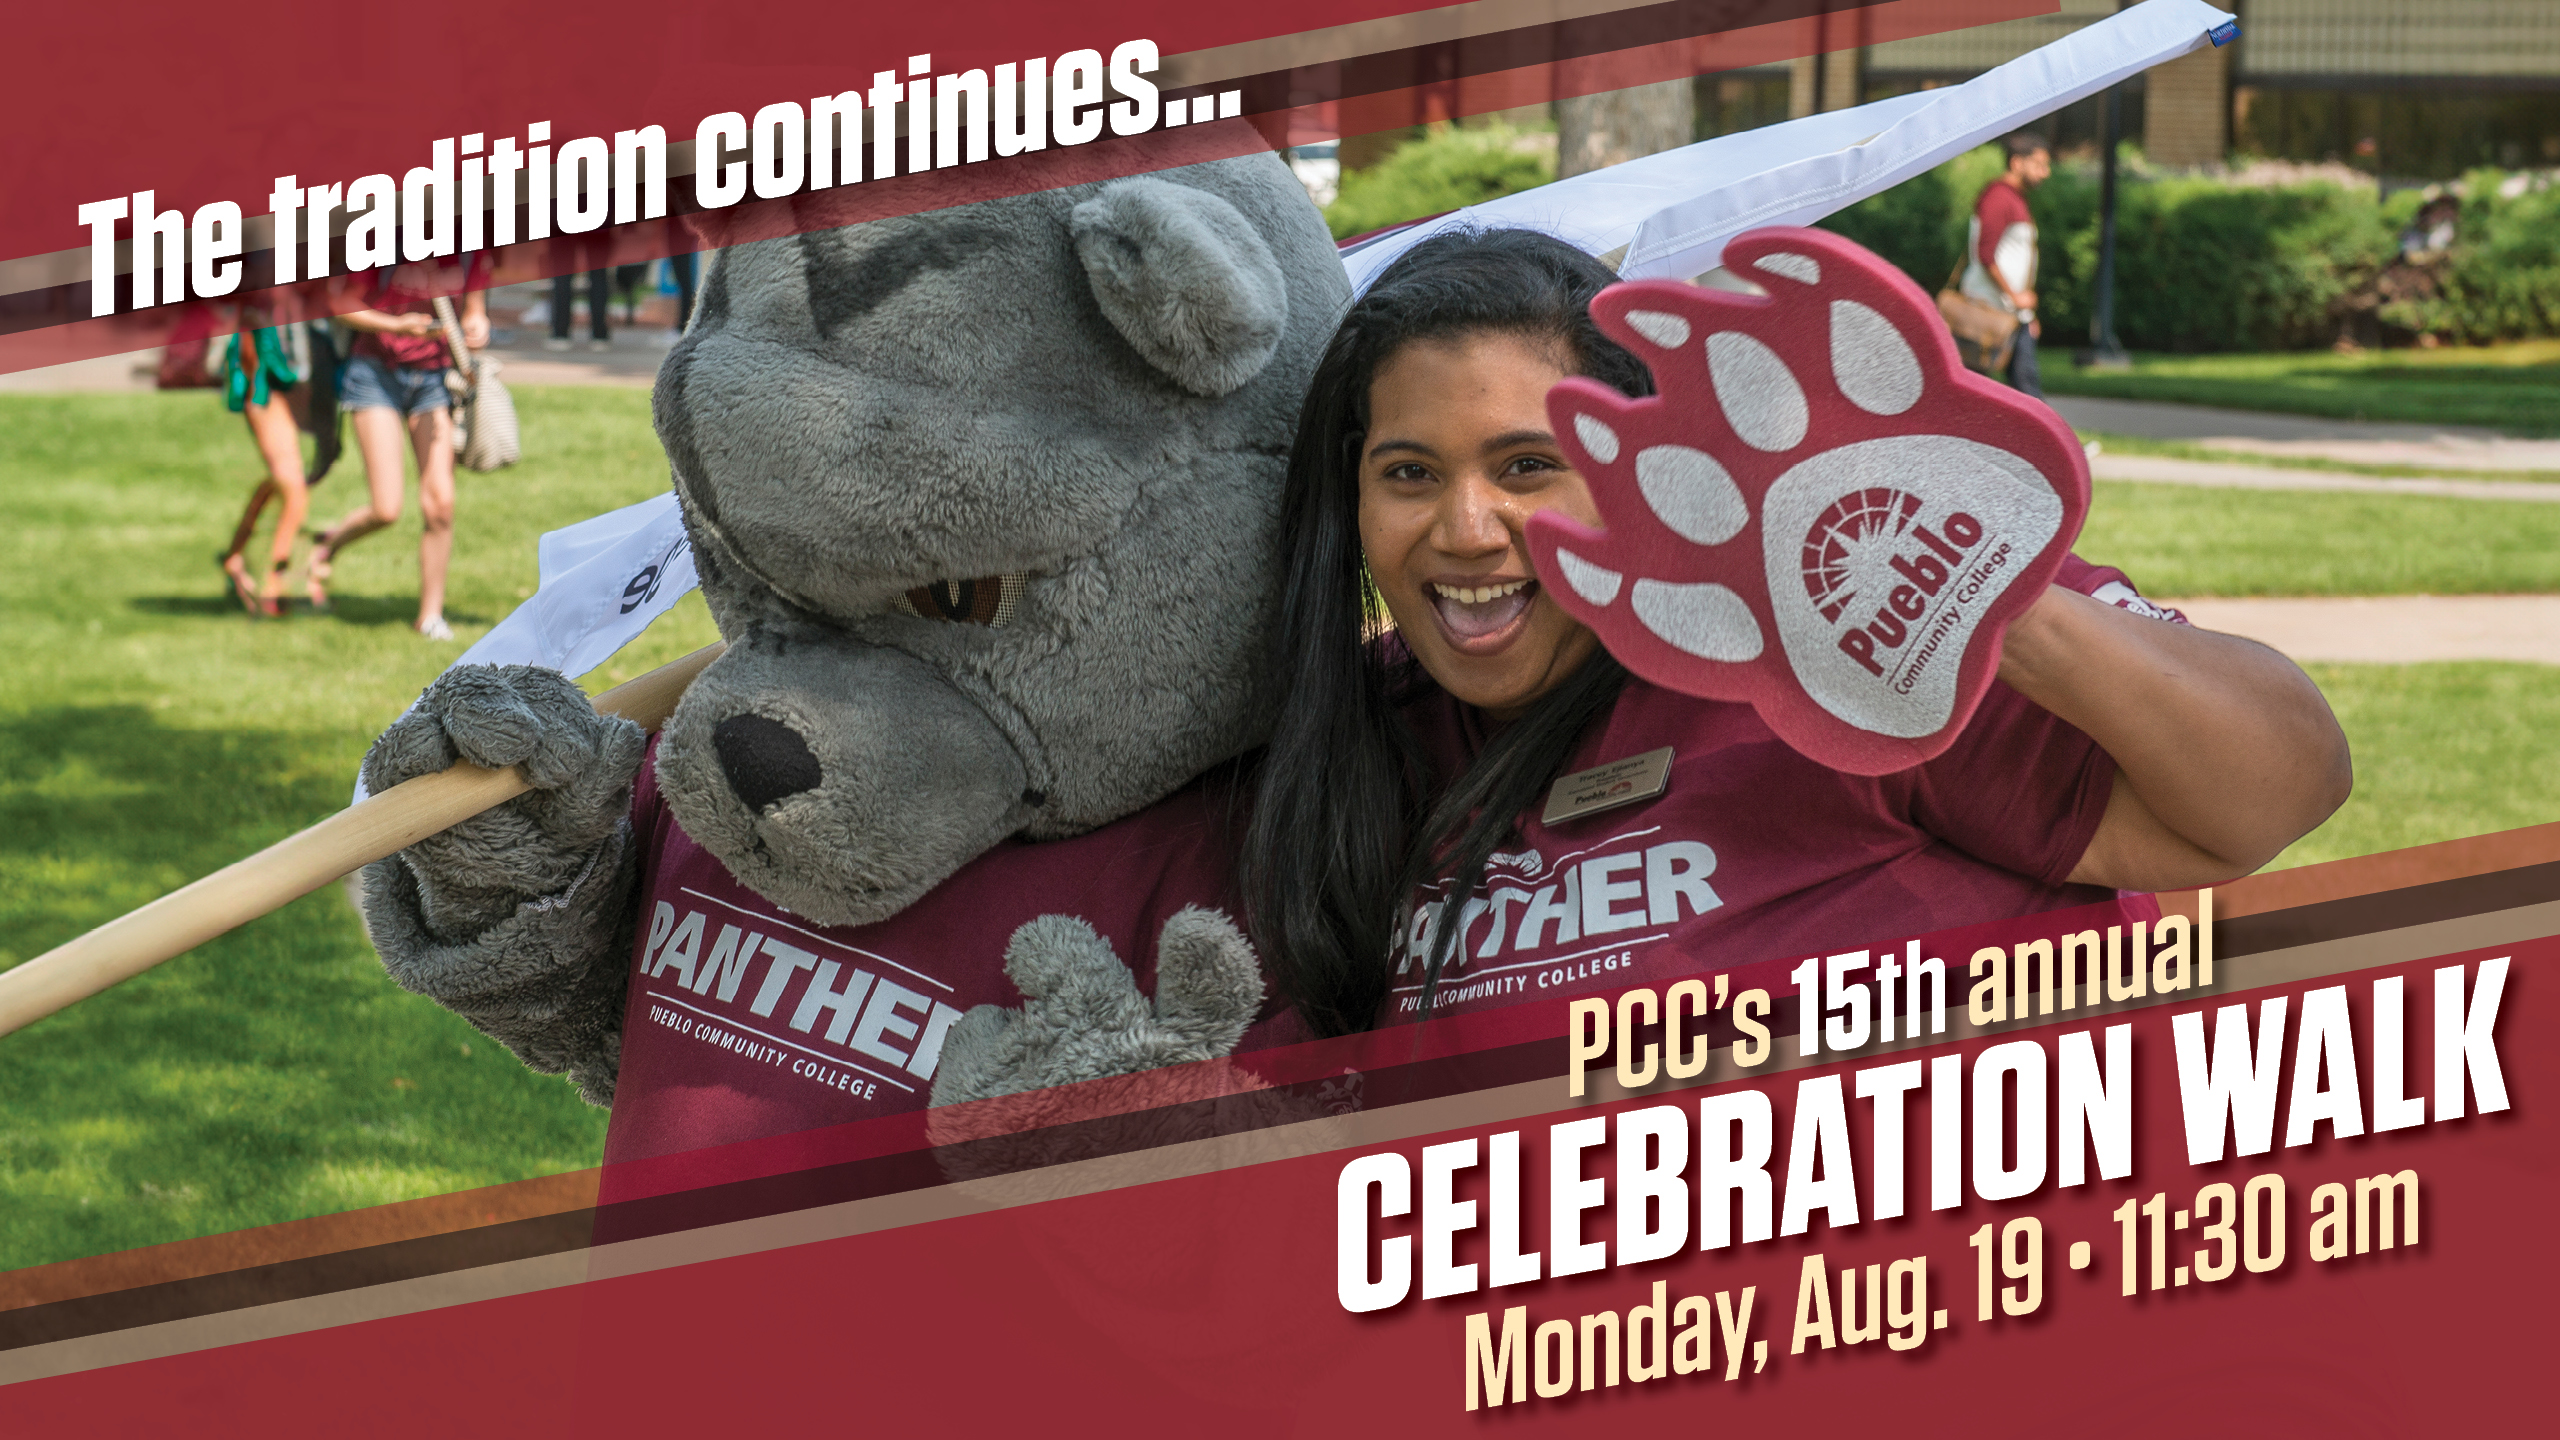 The tradition continues! PCC's 15th annual Celebration Walk - Monday, August 19, 11:30 a.m.